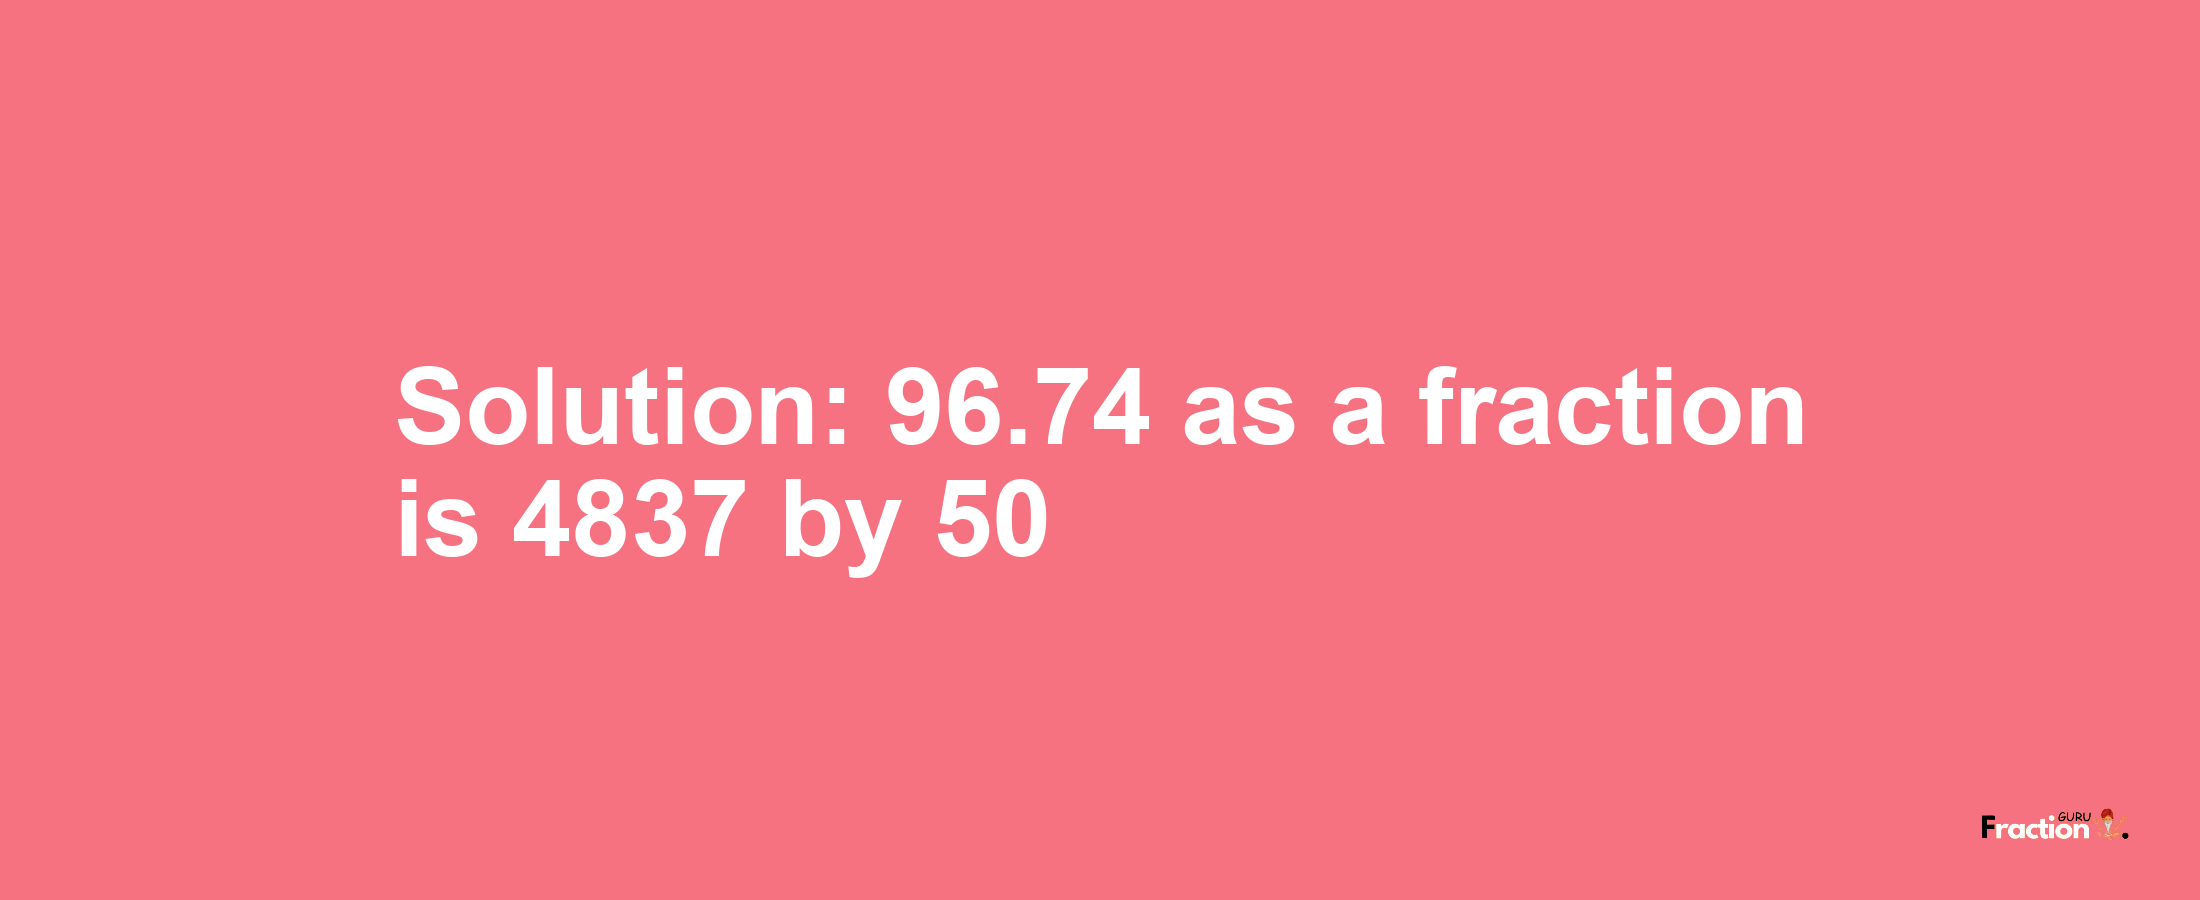 Solution:96.74 as a fraction is 4837/50